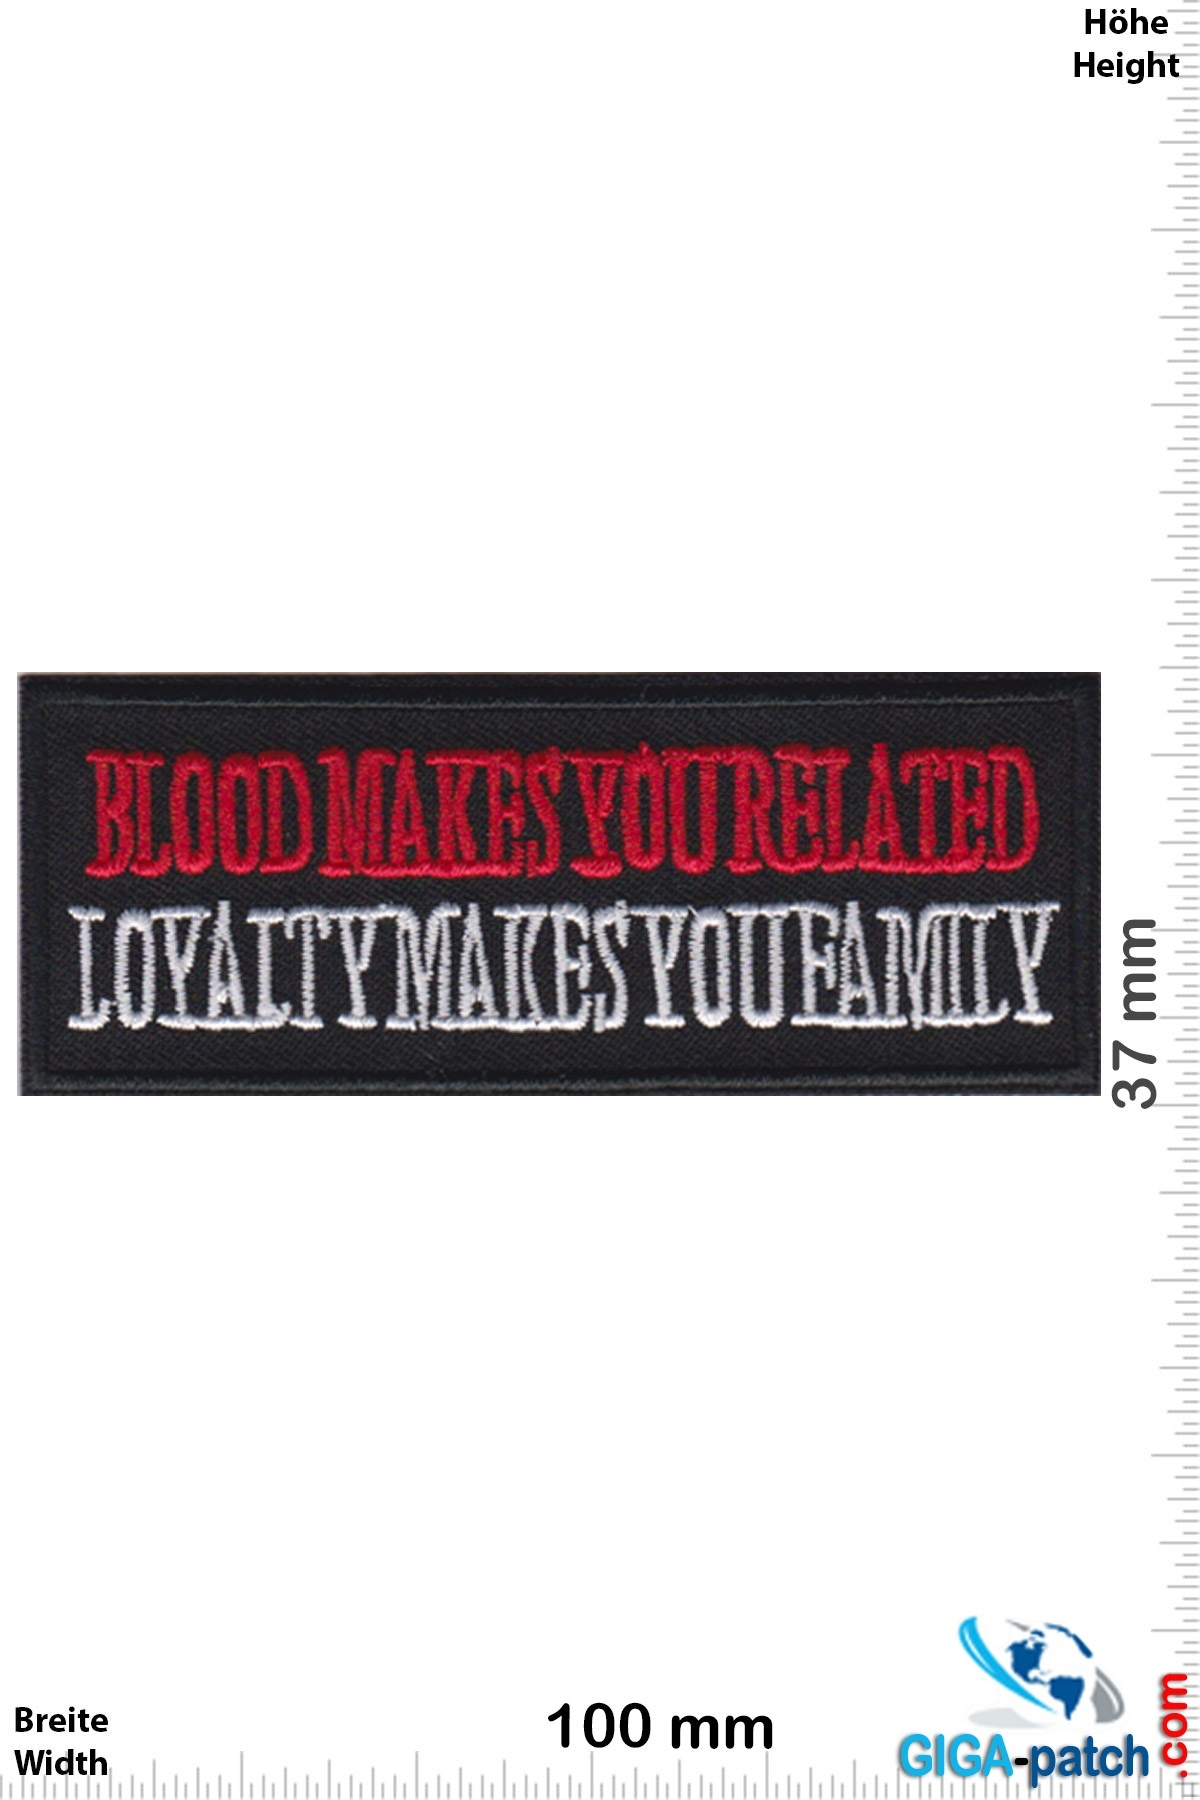 Sprüche, Claims Blood makes you Related - Loyalty makes you Family